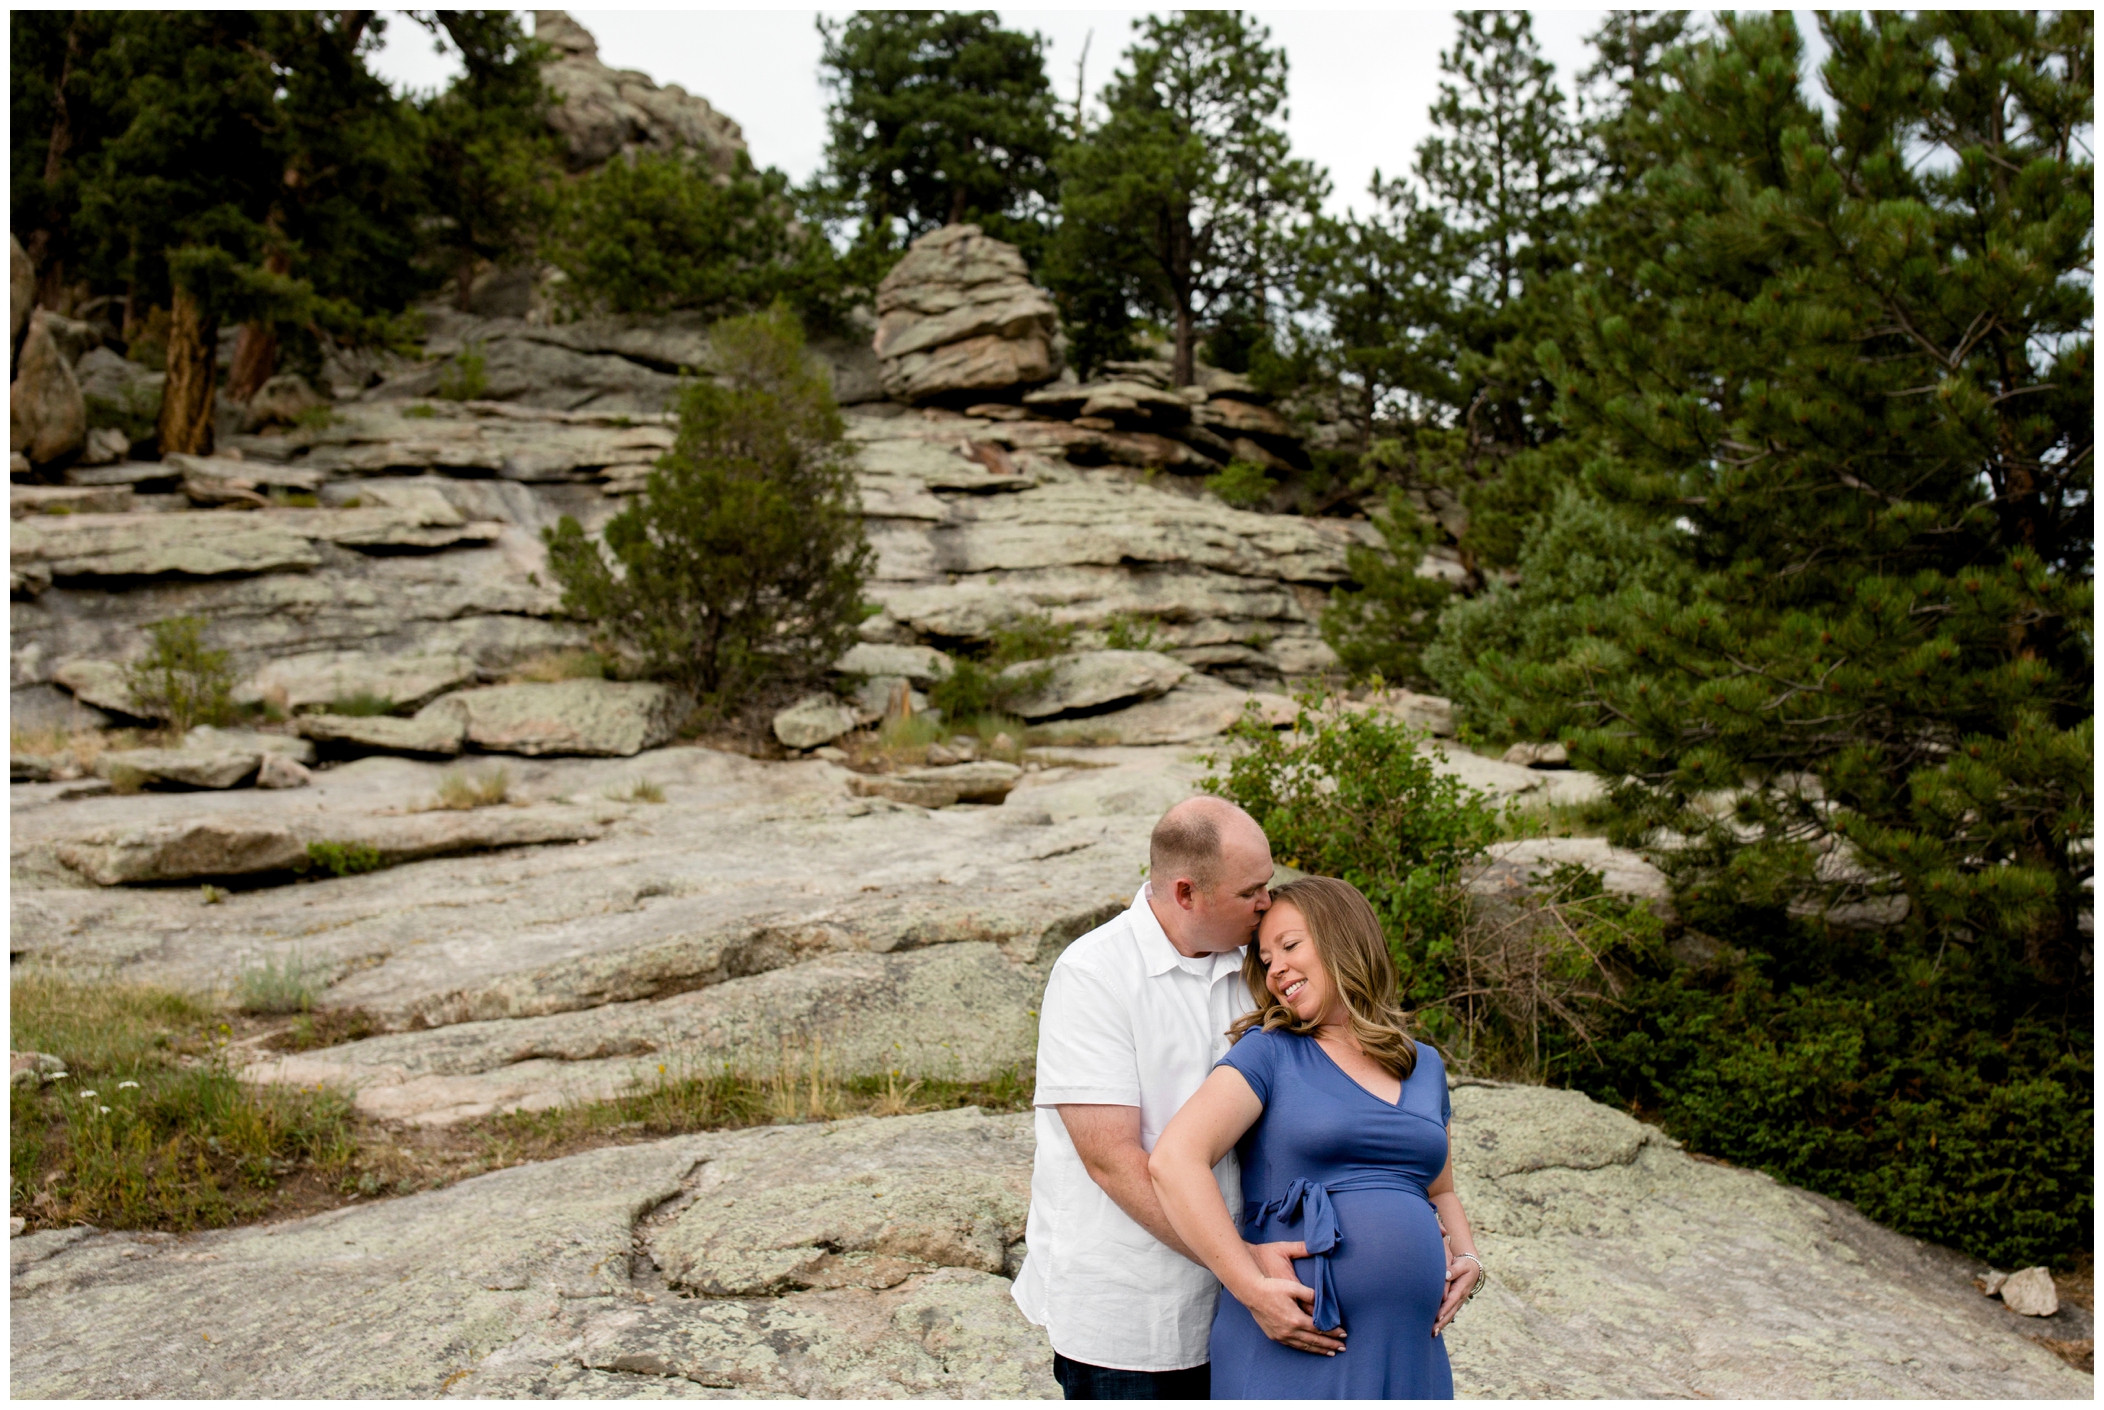 Evergreen Colorado maternity photography with rocks in the background